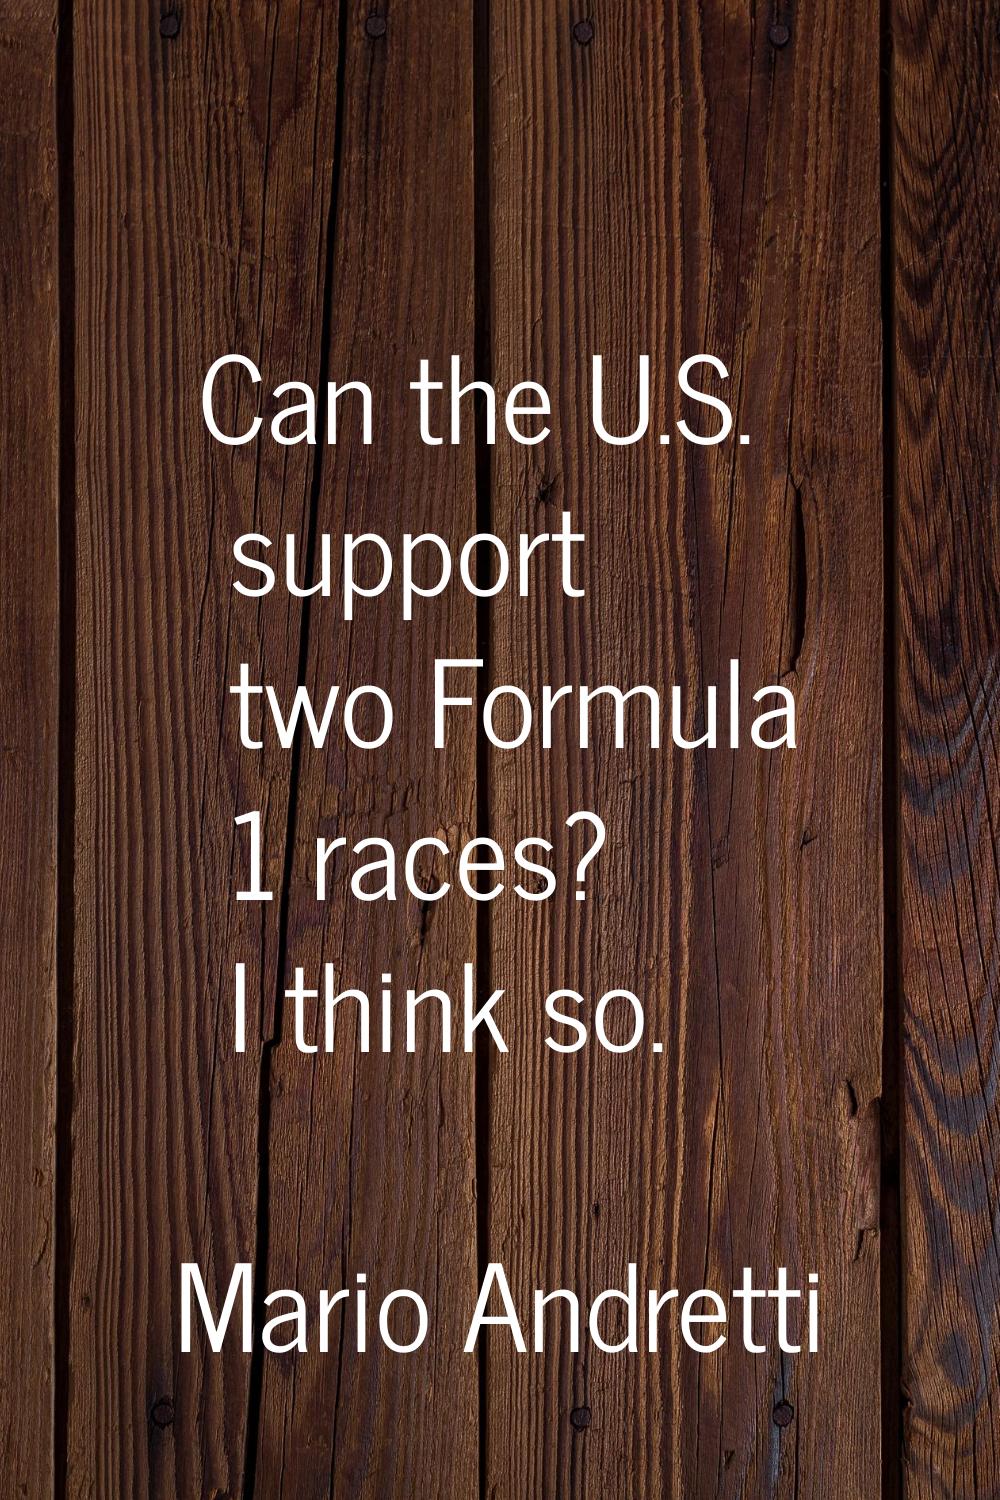 Can the U.S. support two Formula 1 races? I think so.